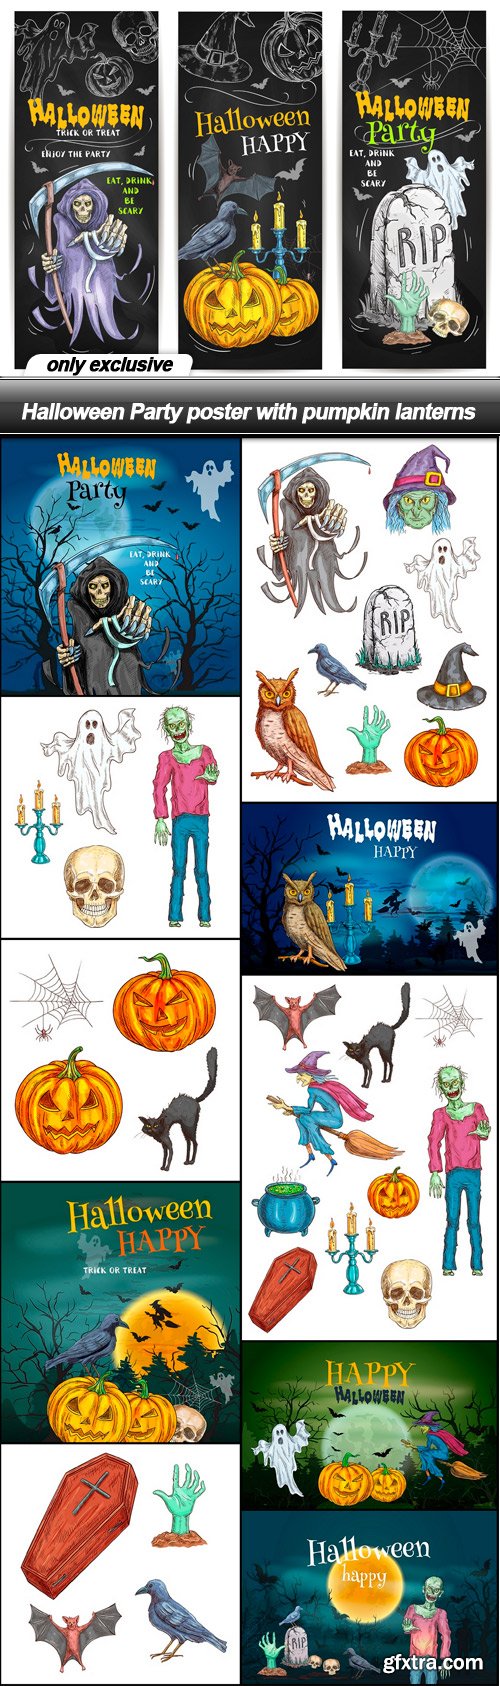 Halloween Party poster with pumpkin lanterns - 11 EPS